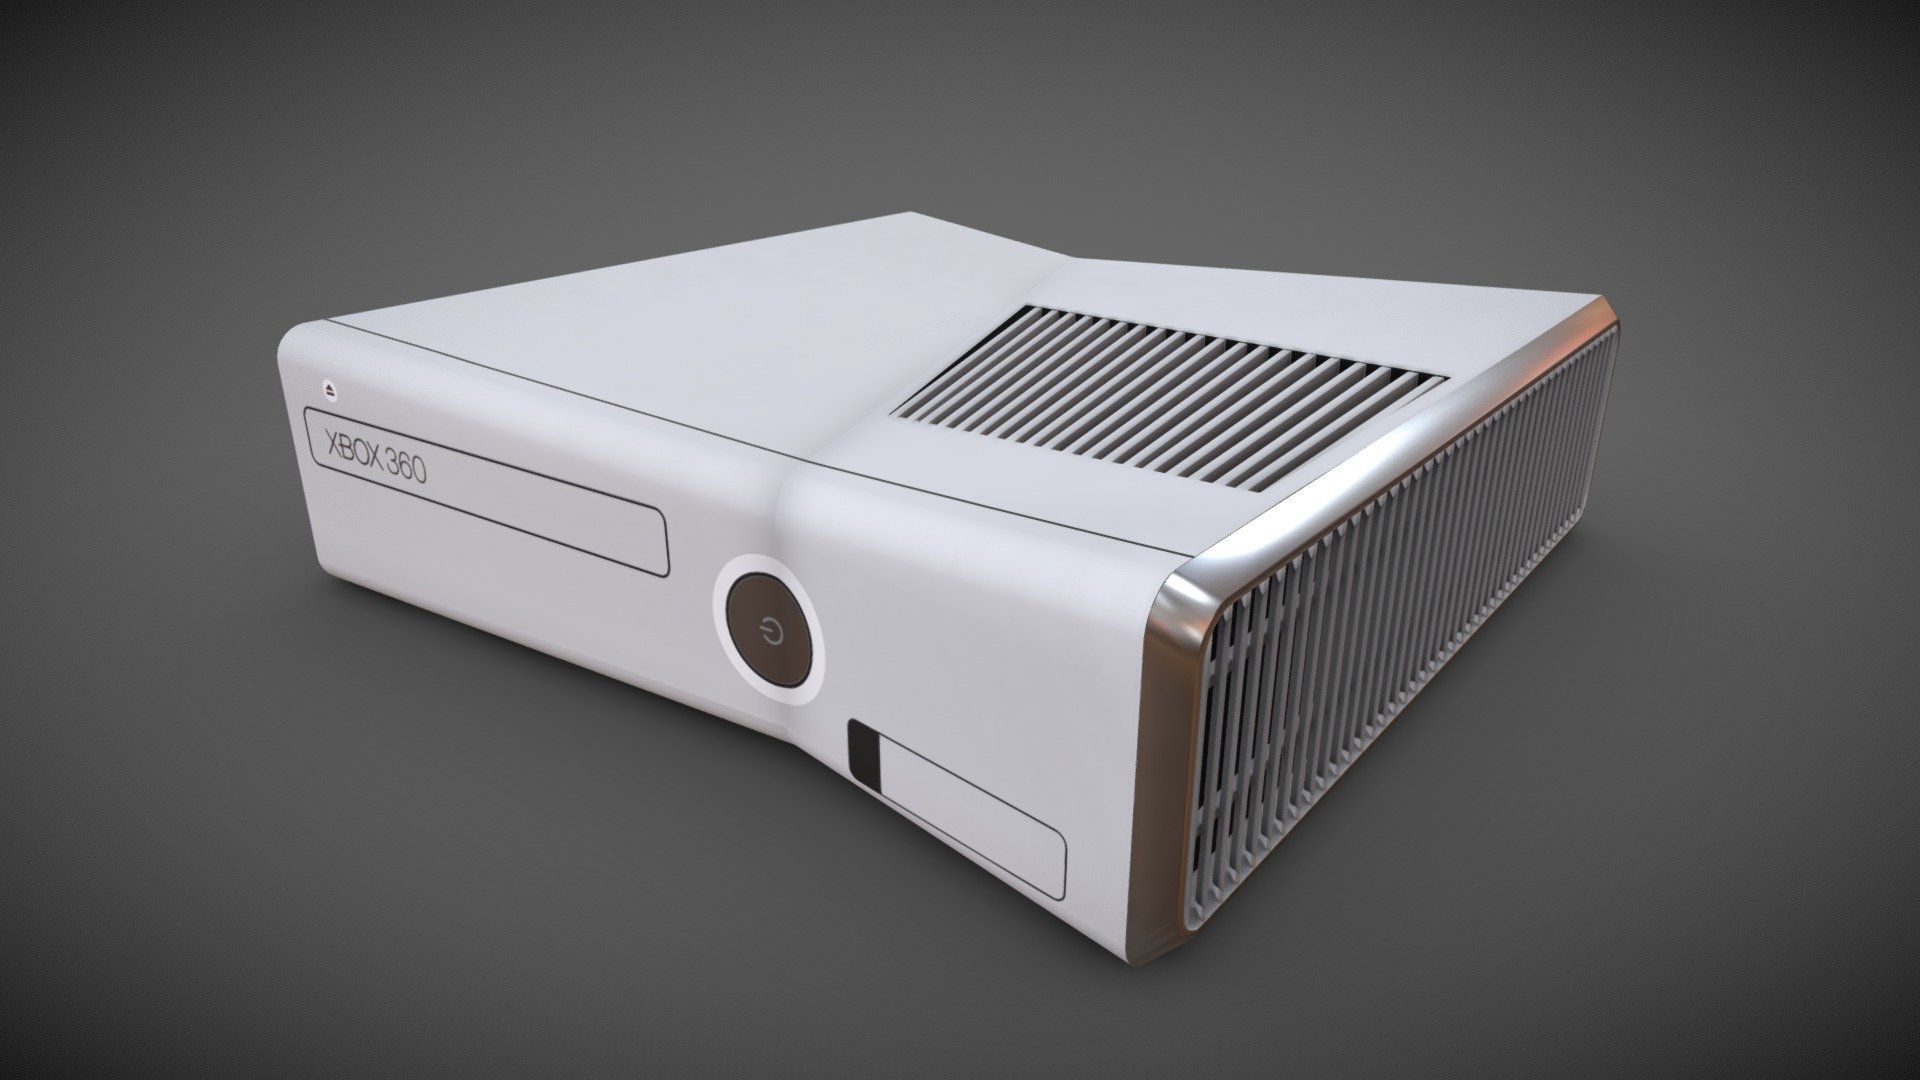 Xbox 360 



File formats: 3ds Max 2012,  FBX



This model contains PNG textures(4096x4096):

-Base Color

-Metallness

-Roughness



-Diffuse

-Glossiness

-Specular



-Normal

-Ambient Occlusion - Xbox 360 - Buy Royalty Free 3D model by fade_to_black 3d model